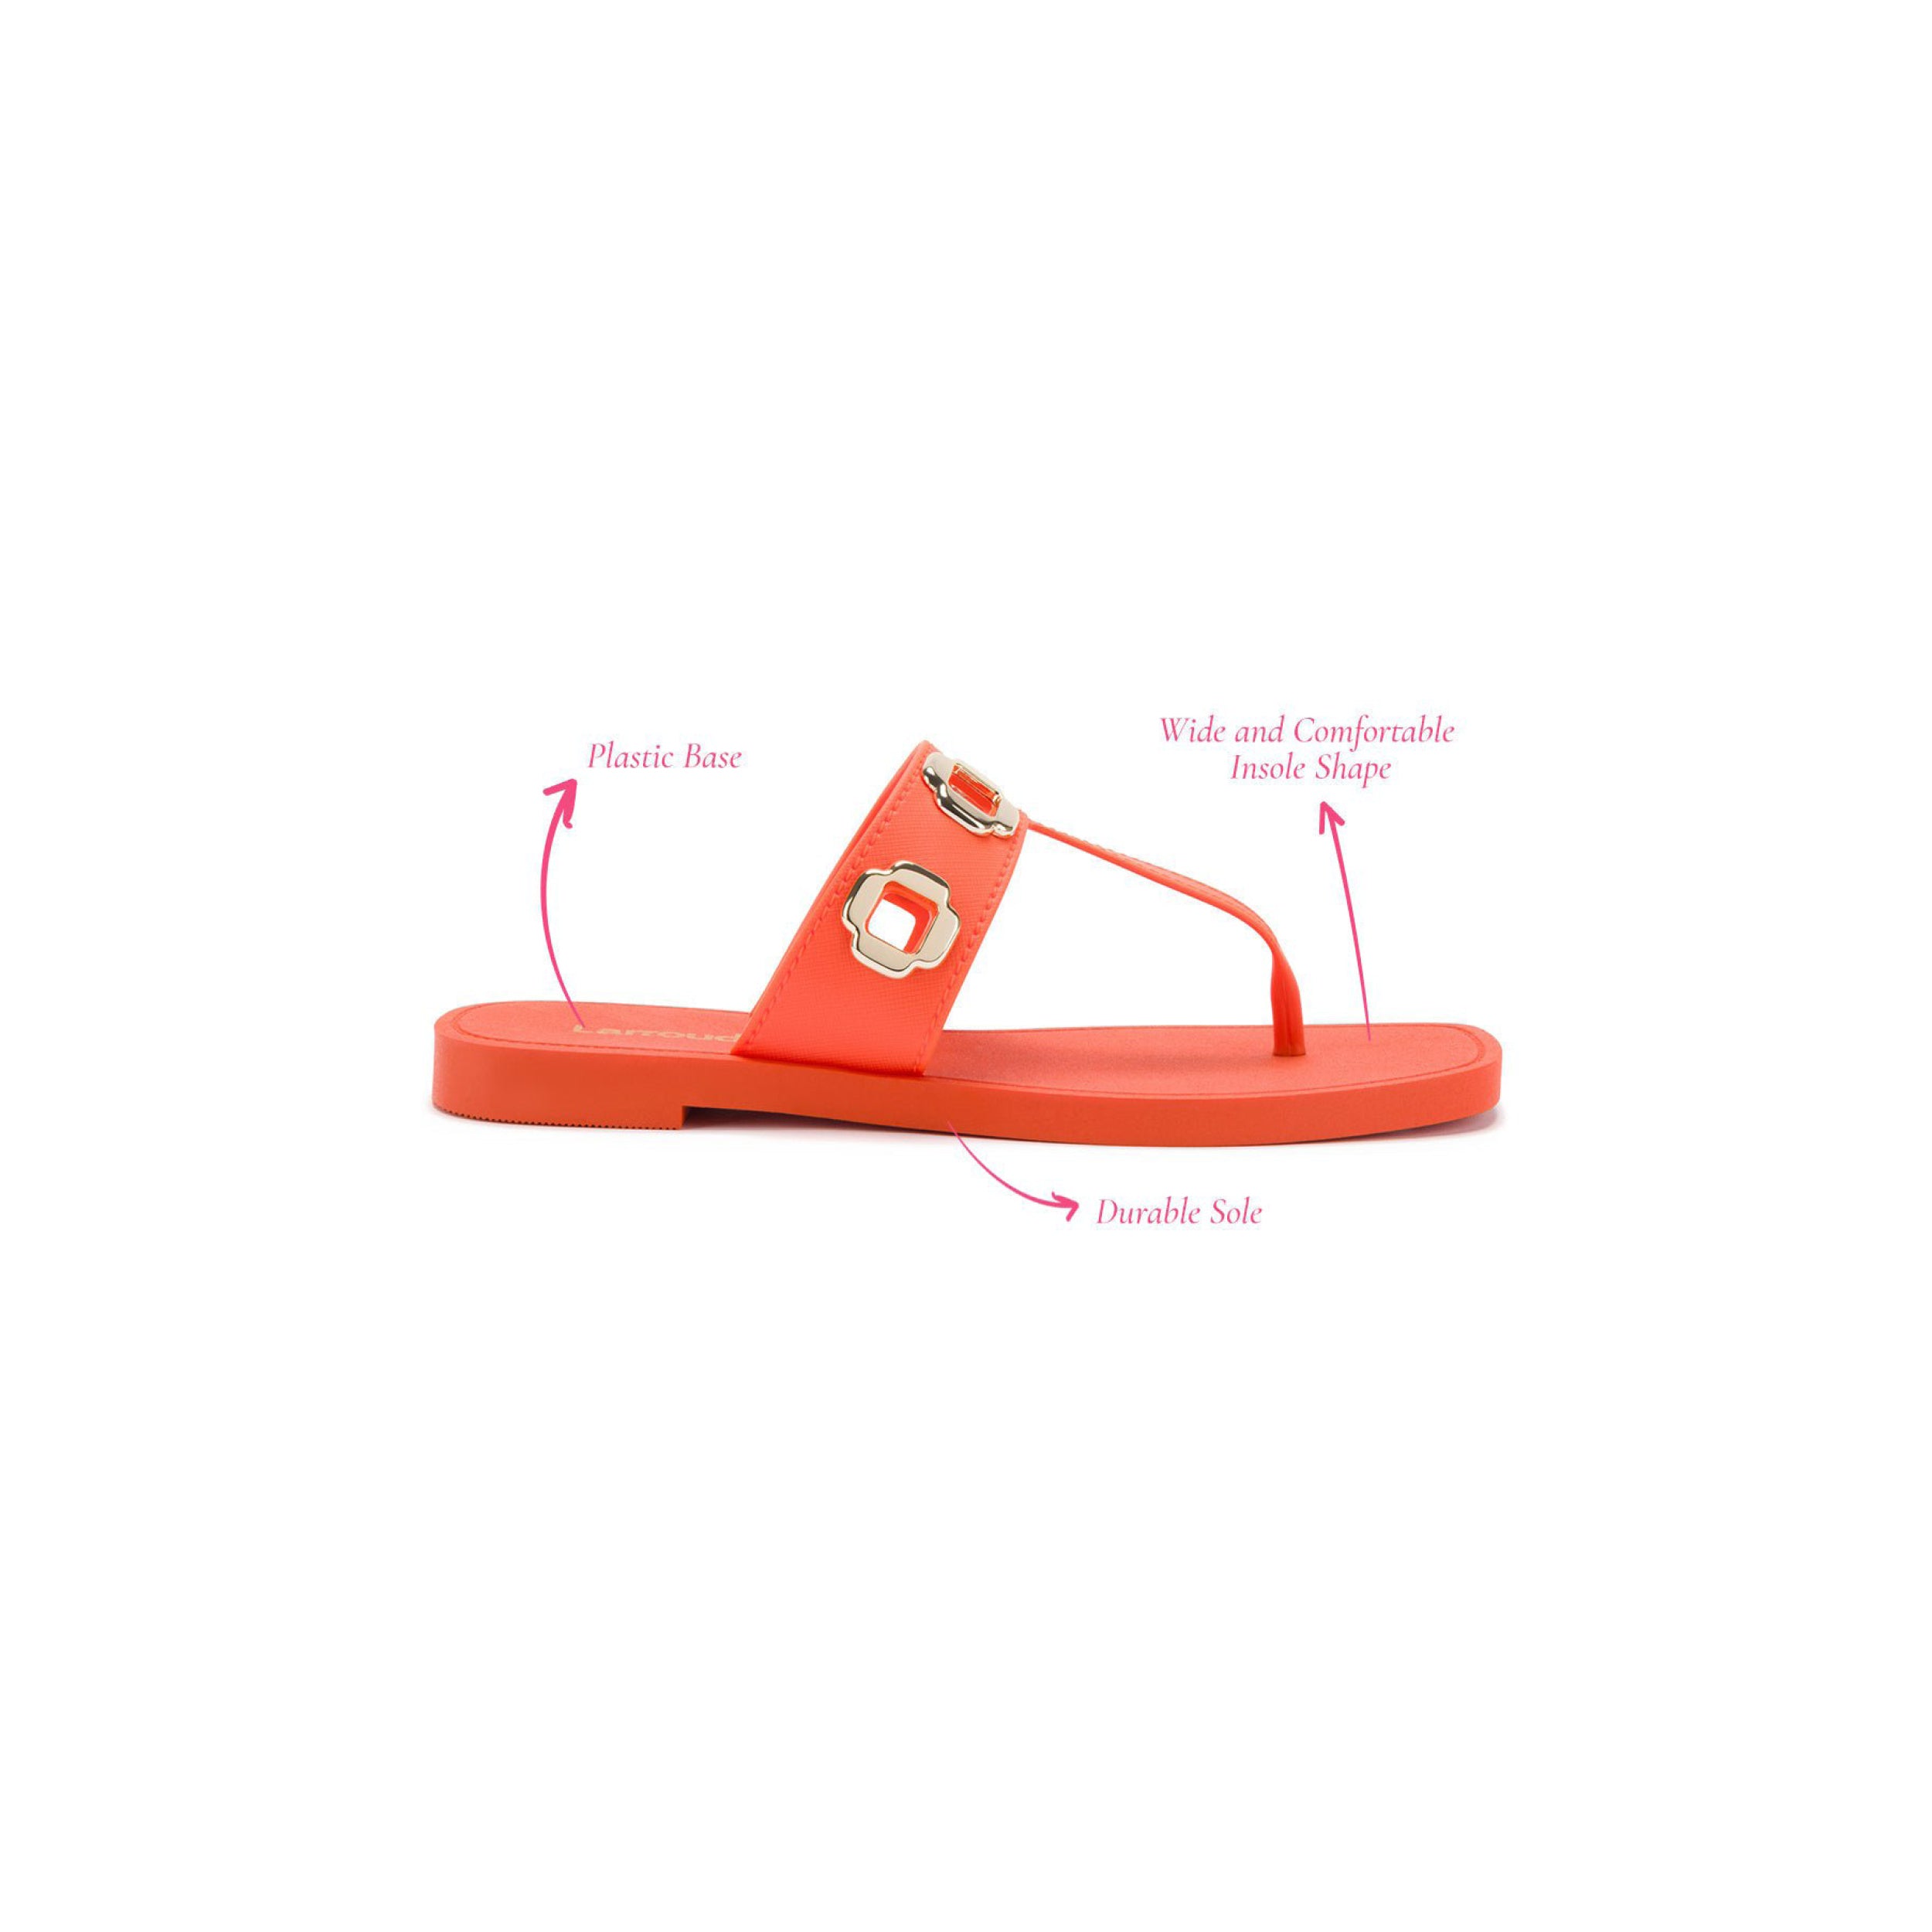 Image of a bright orange sandal with a t-strap version and two decorative round buckles on the upper strap. Annotations highlight features: "Plastic Base," "Wide and Comfortable Insole Shape," and "Durable Sole." The Milan S In Orange PVC, part of the Milan family, has a flat, open-toe design.